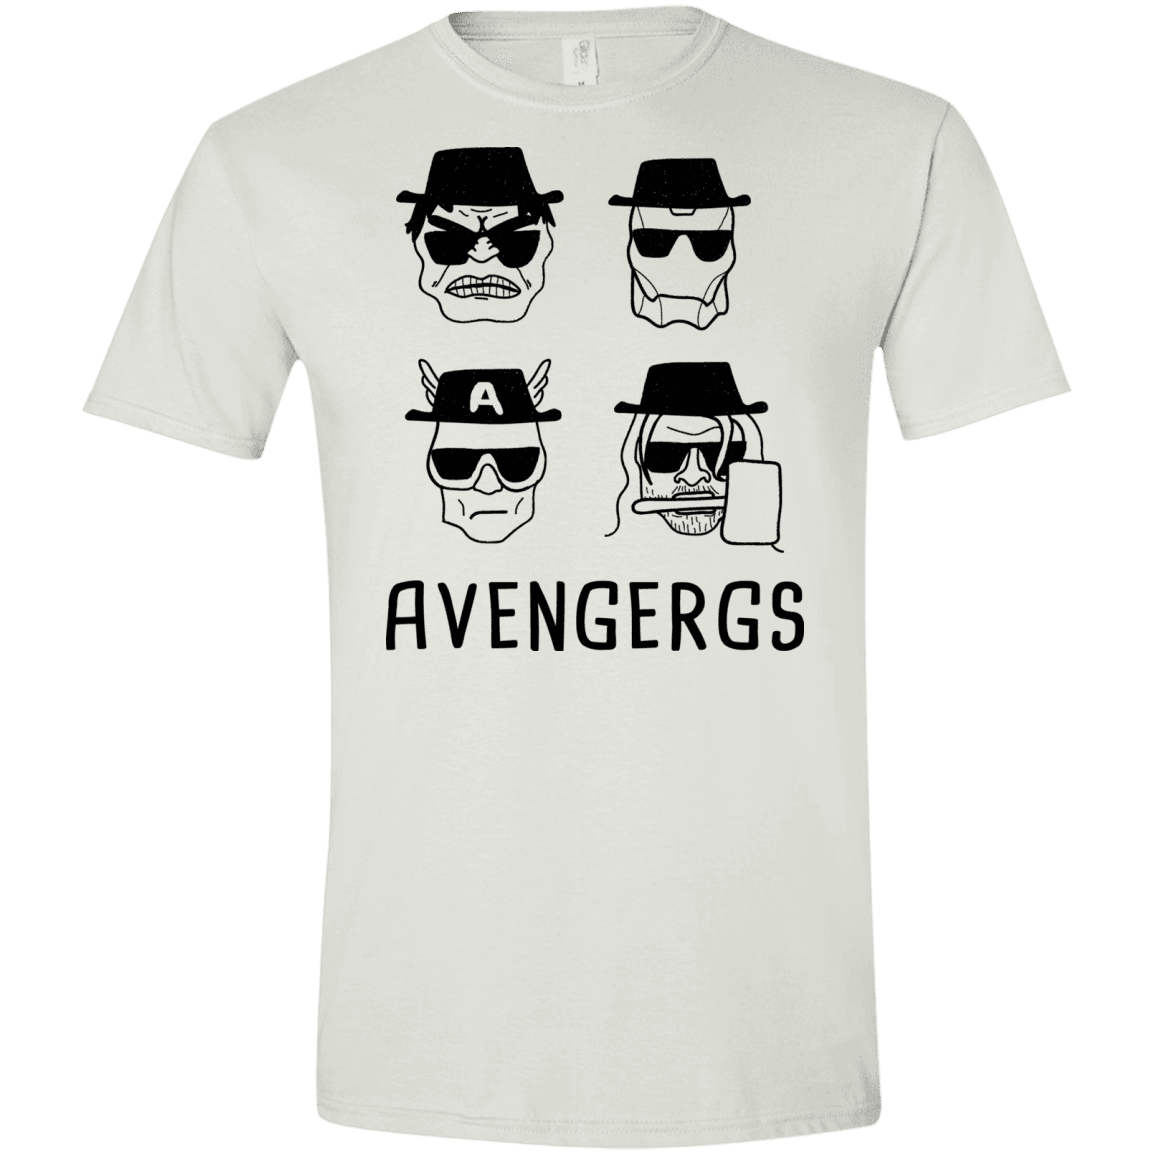 T-Shirts White / X-Small Avengergs Men's Semi-Fitted Softstyle